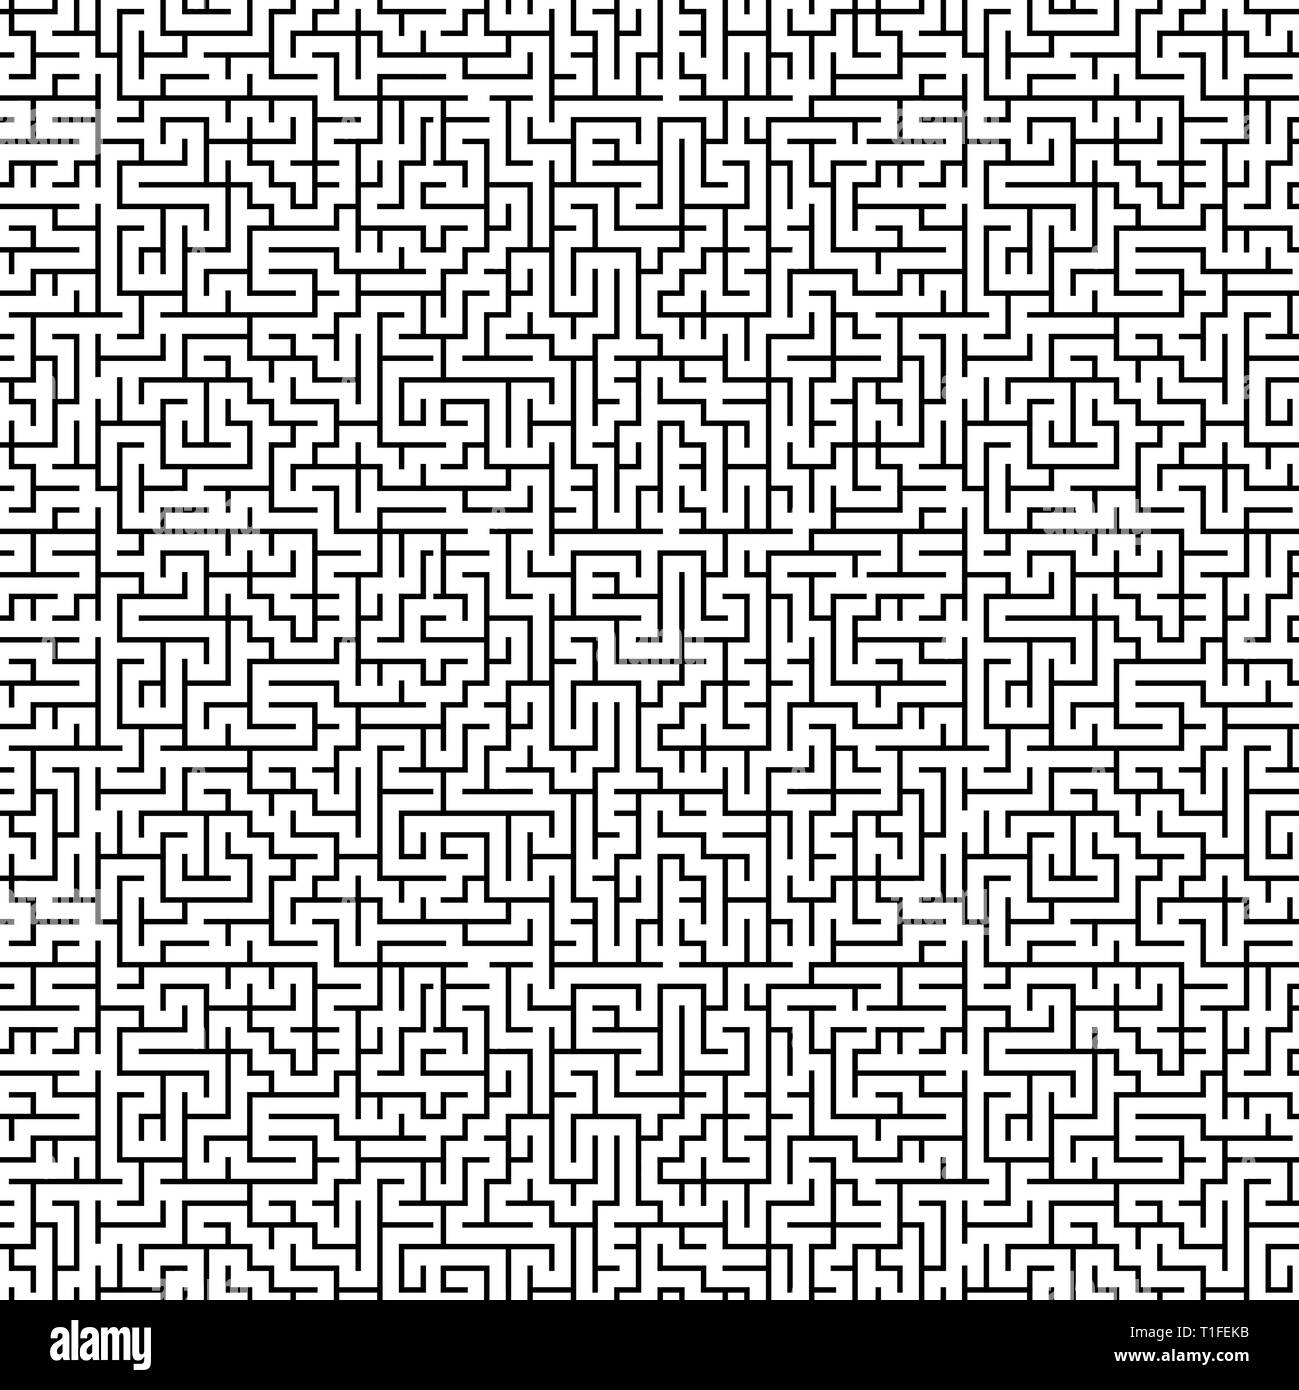 Large area nontree tileable maze pattern Stock Photo